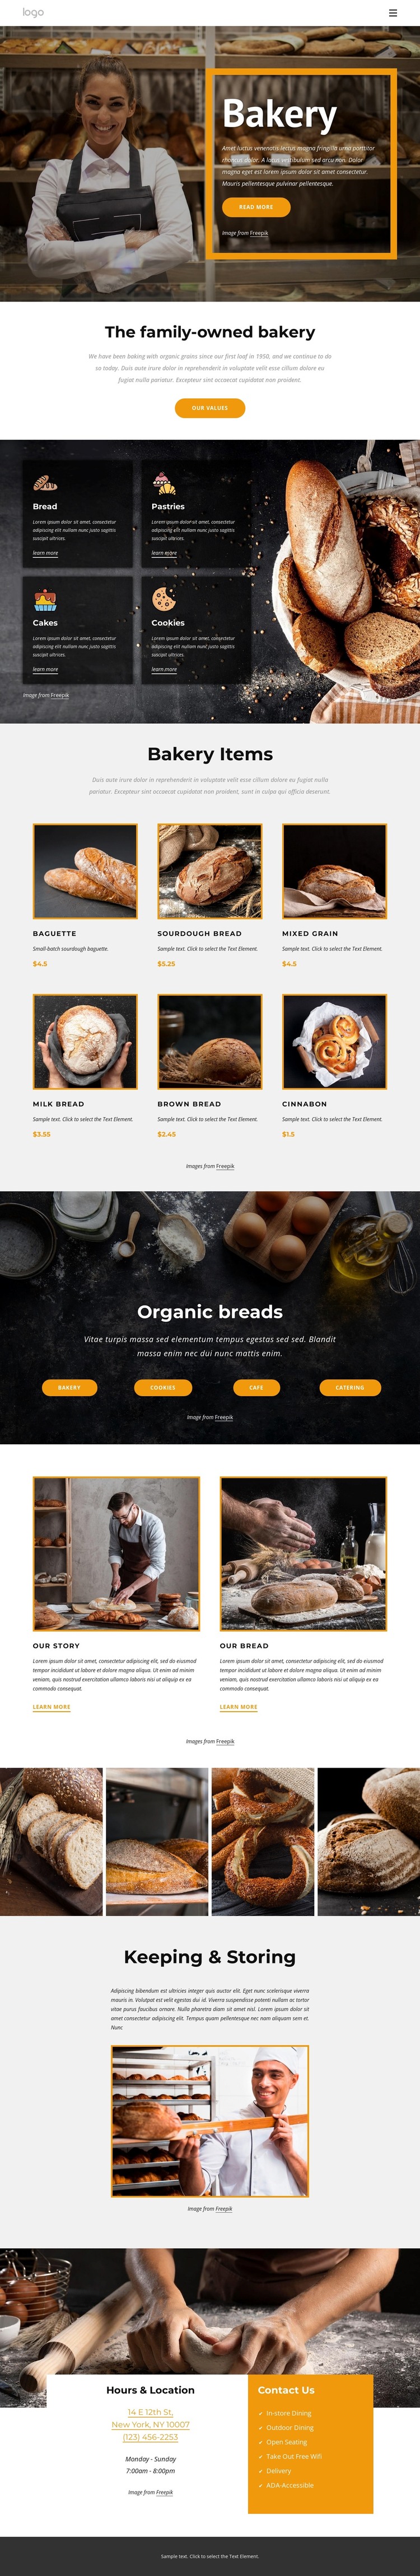 The family-owned bakery WordPress Theme